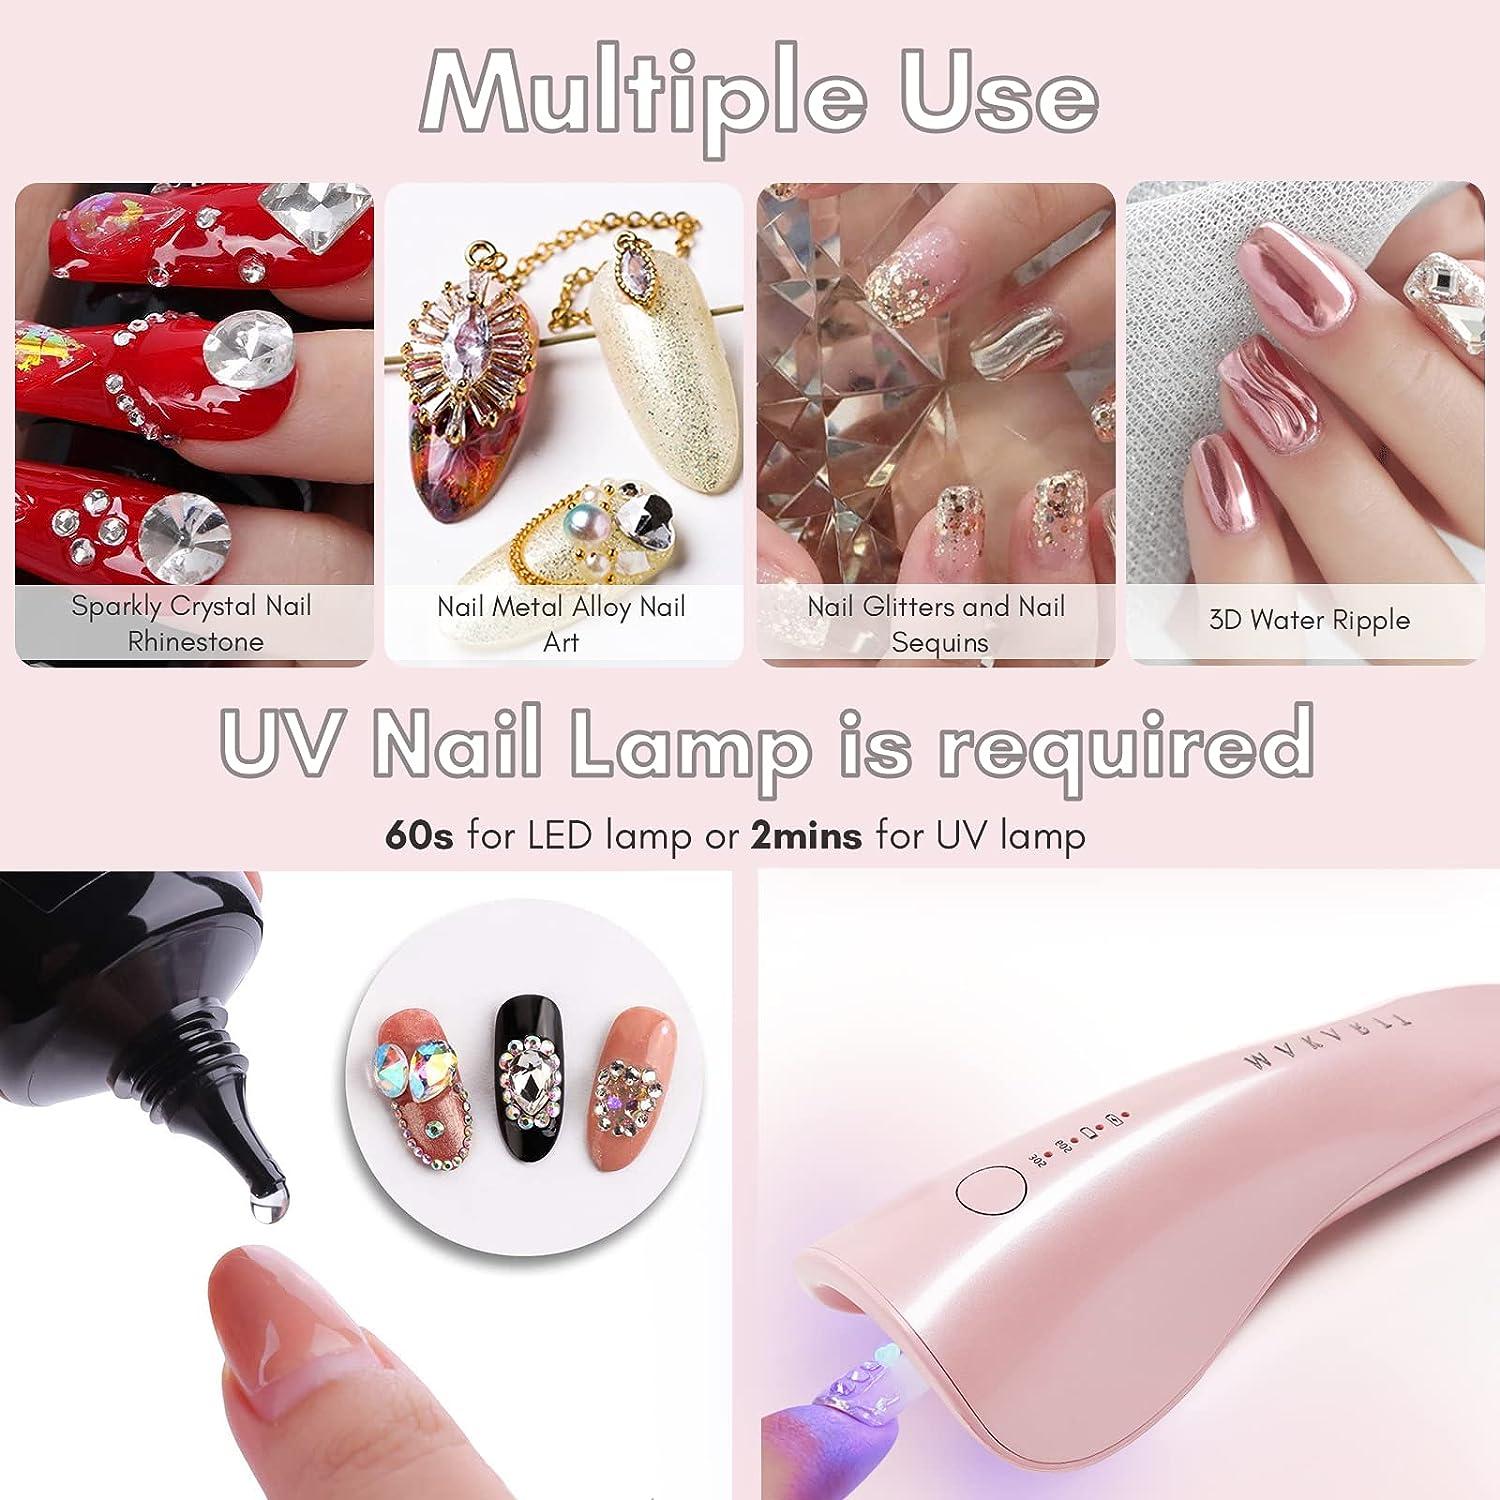 How to do Rhinestone Gel Nails at Home - Payton lee